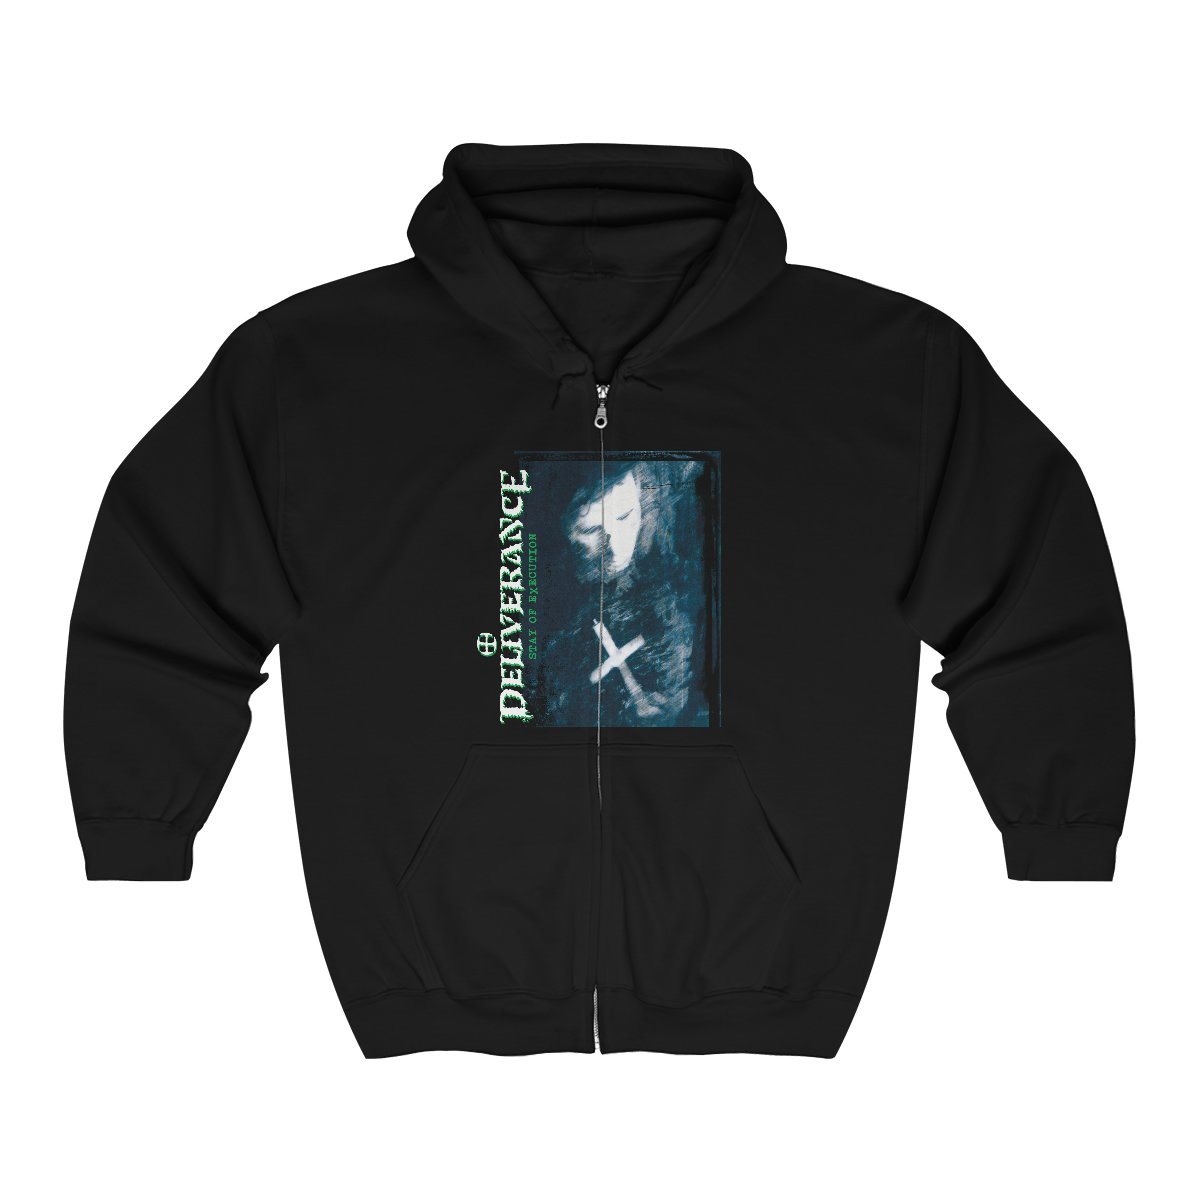 Deliverance – Stay of Execution Full Zip Hooded Sweatshirt